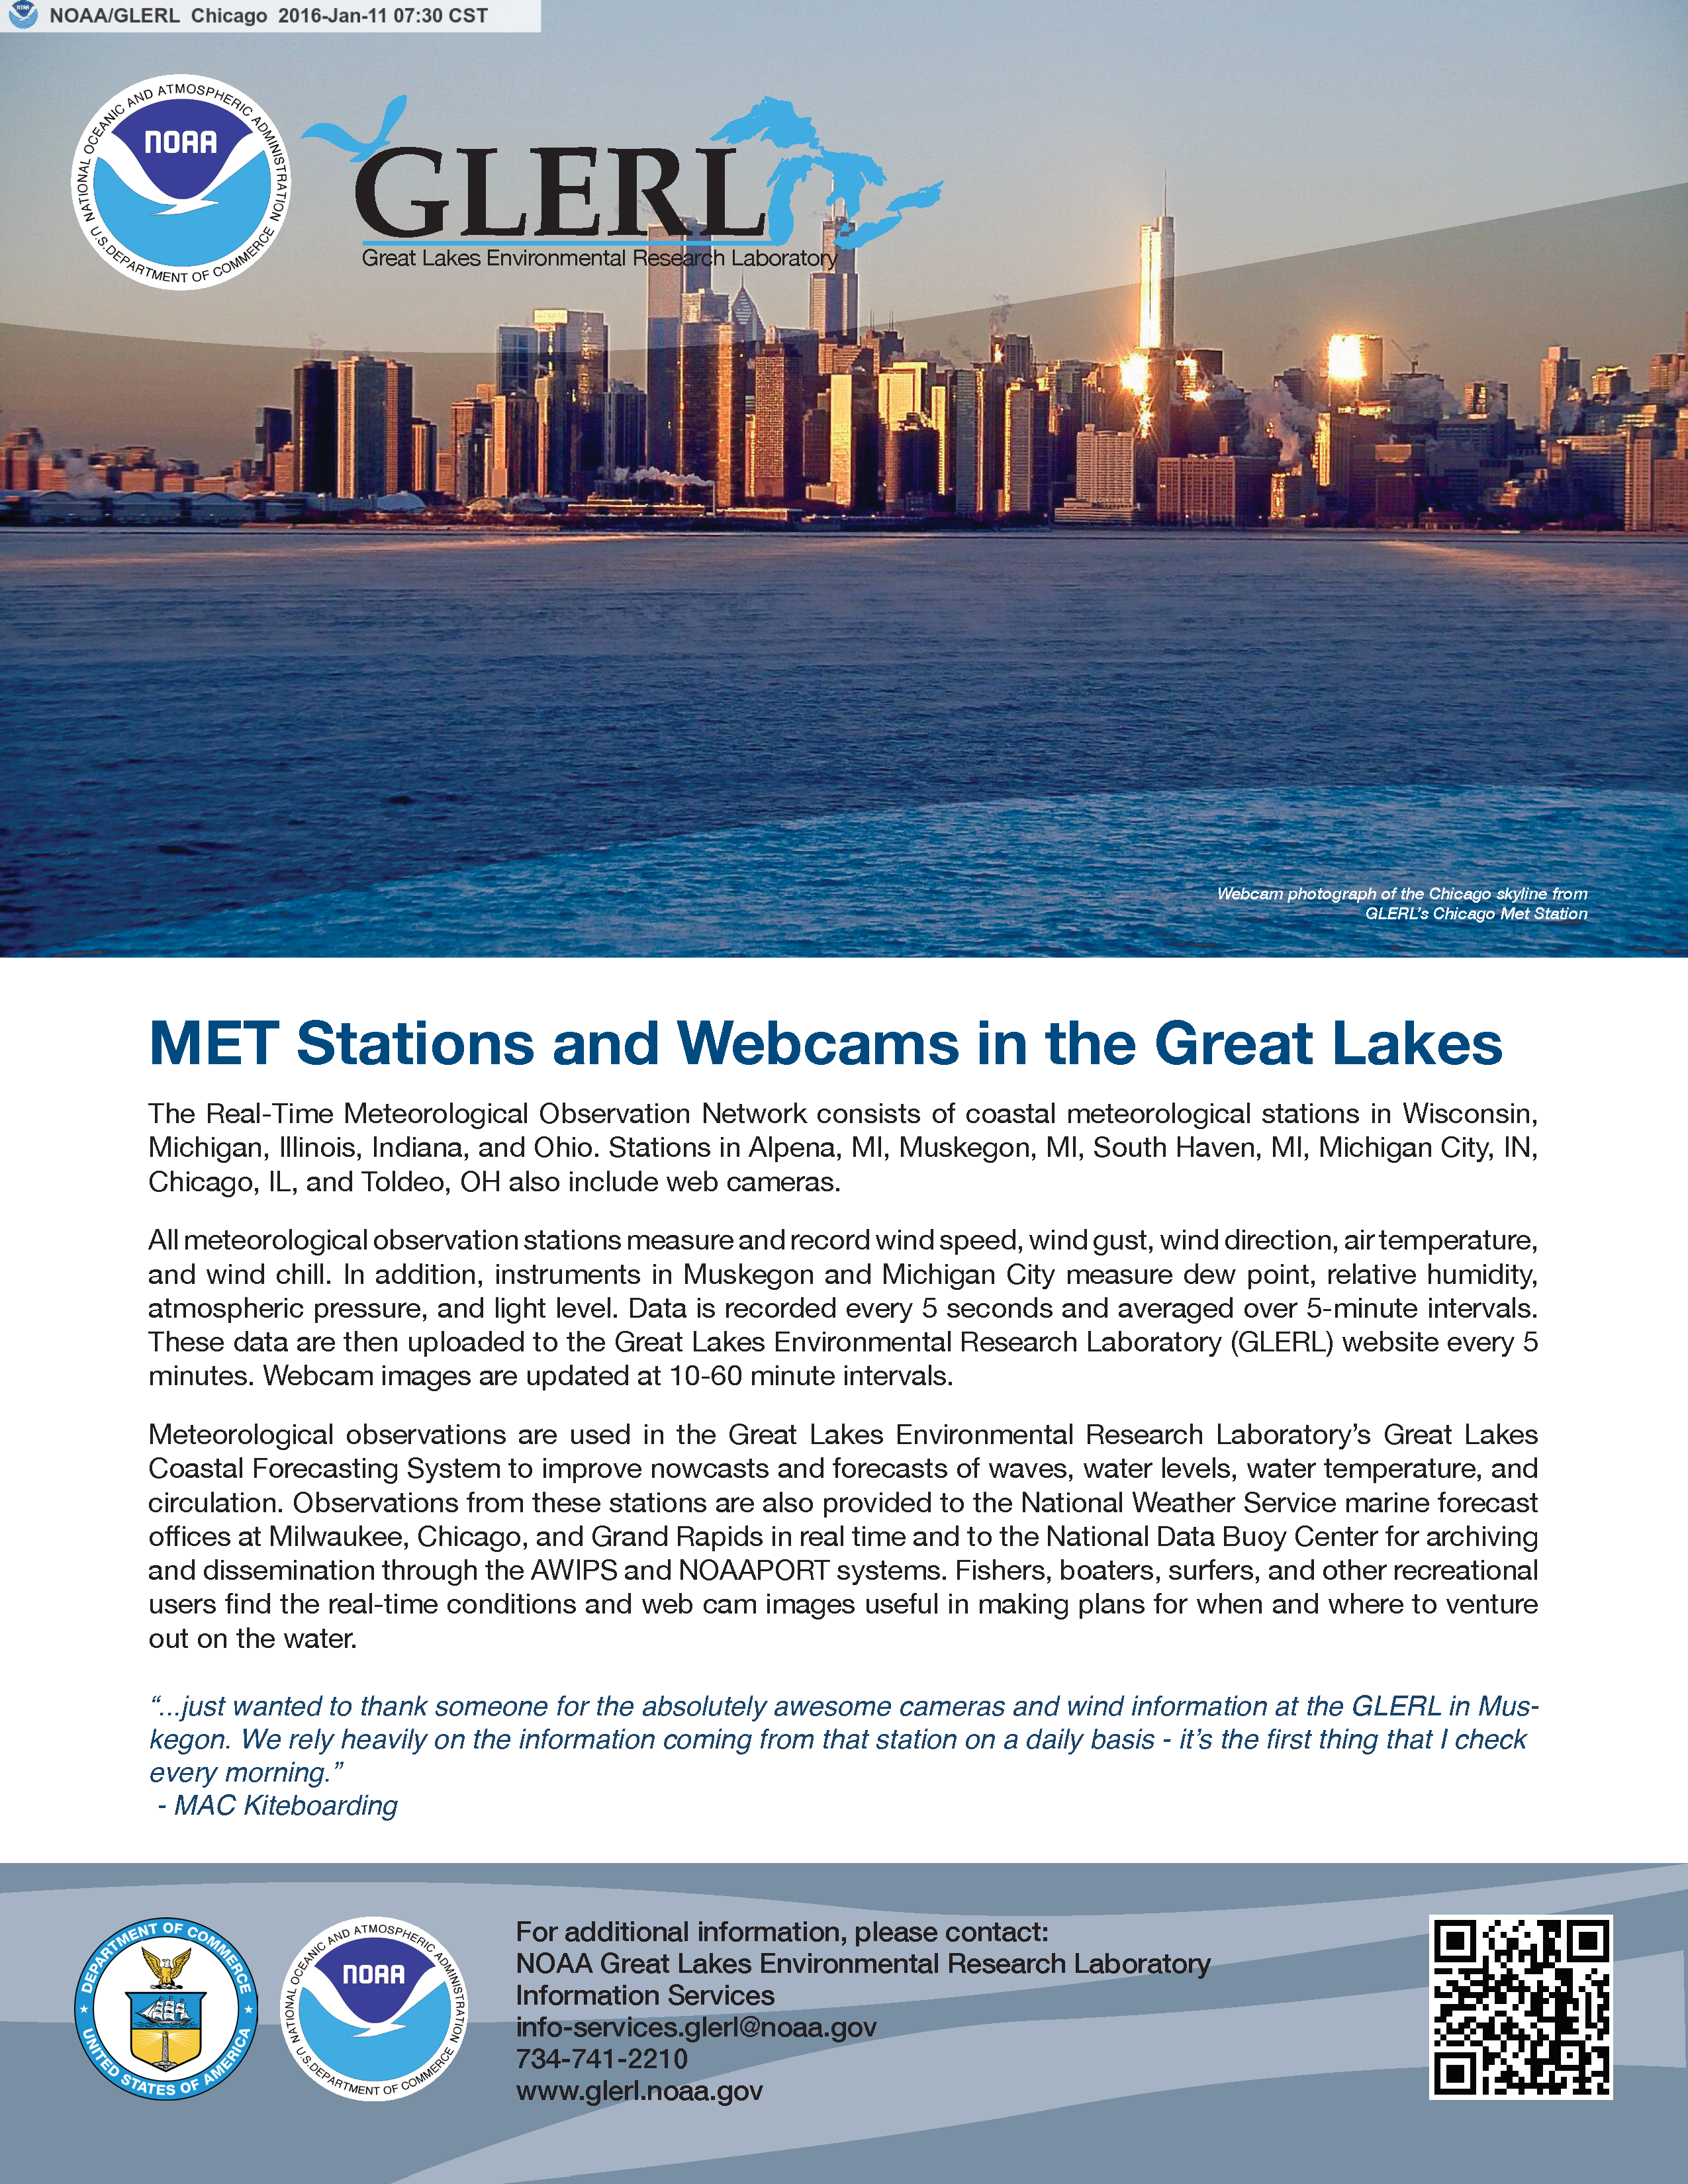 MET Stations and Webcams in the Great Lakes, click to open PDF